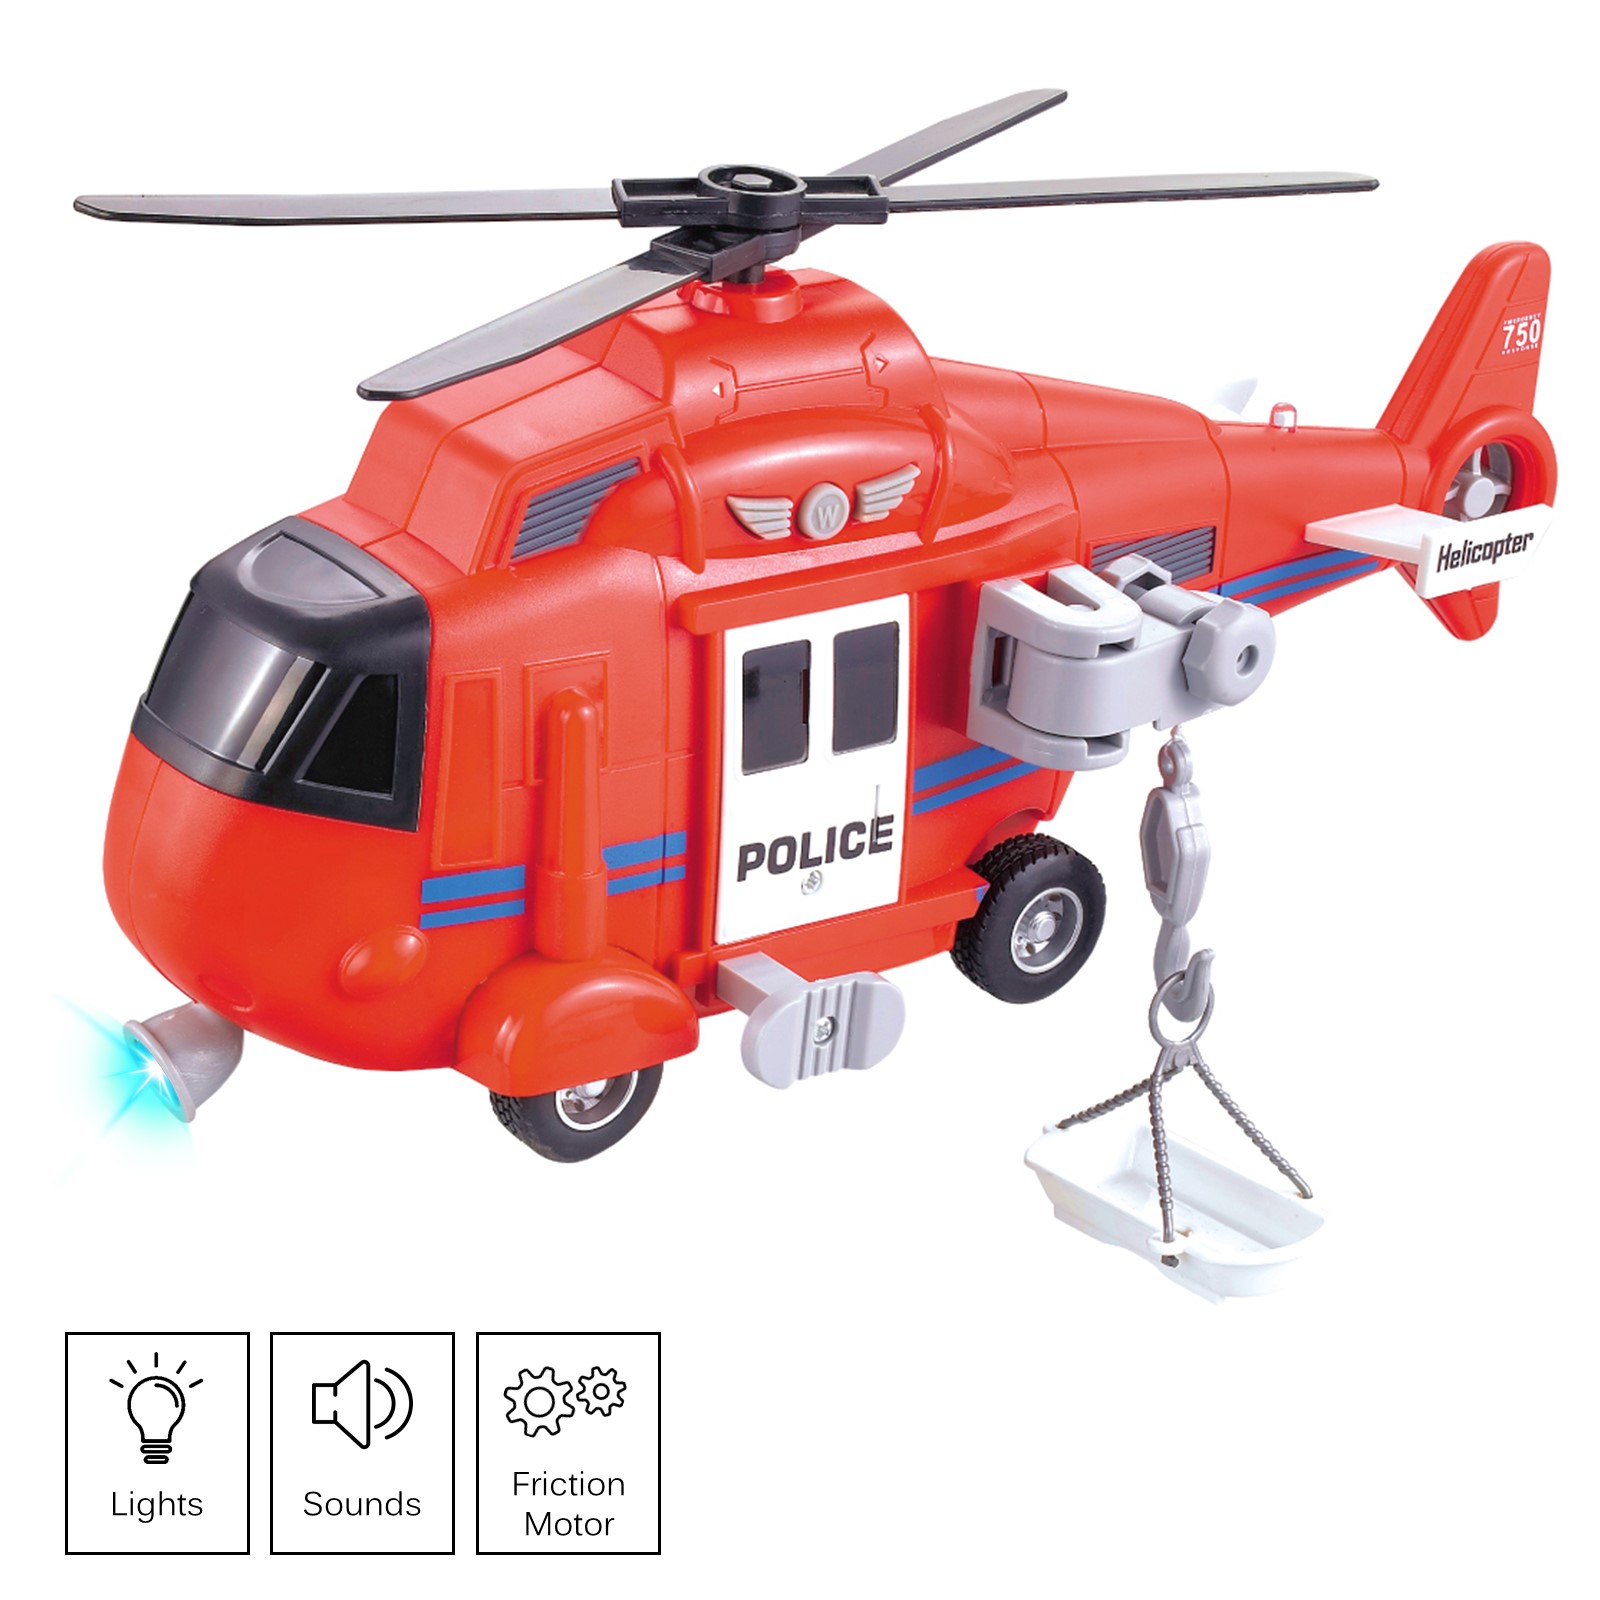 Vokodo Fire Rescue Helicopter 11 With Lights Sounds Push And Go Includes Cargo Basket Durable Kids Firefighter Friction Chopper Toy Pretend Play Airplane Truck Great Gift Children Boys Girls Toddlers